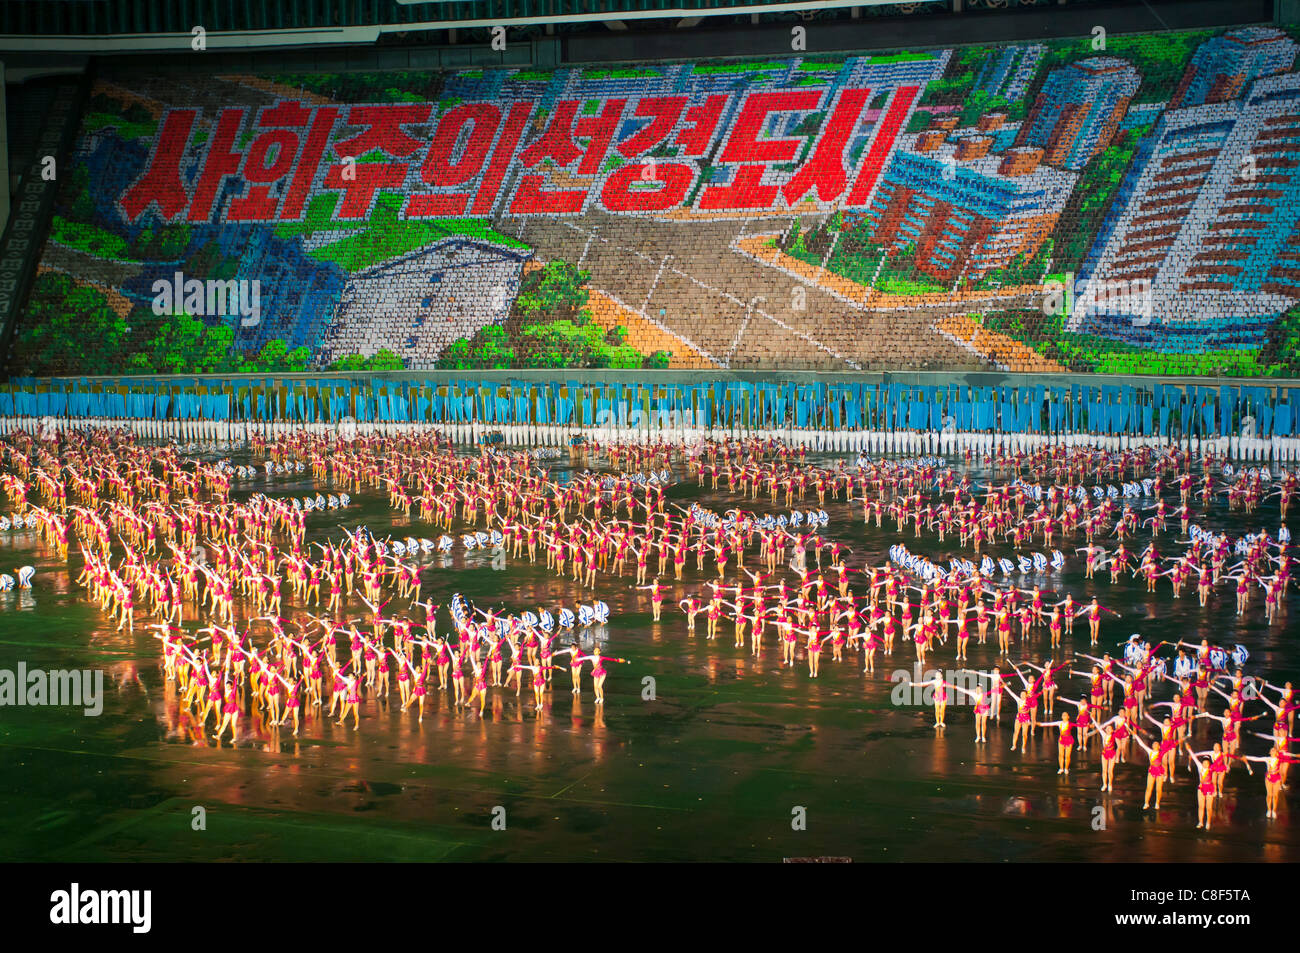 Dancers and Acrobats at the Airand festival, Mass games in Pyongyang, North Korea Stock Photo